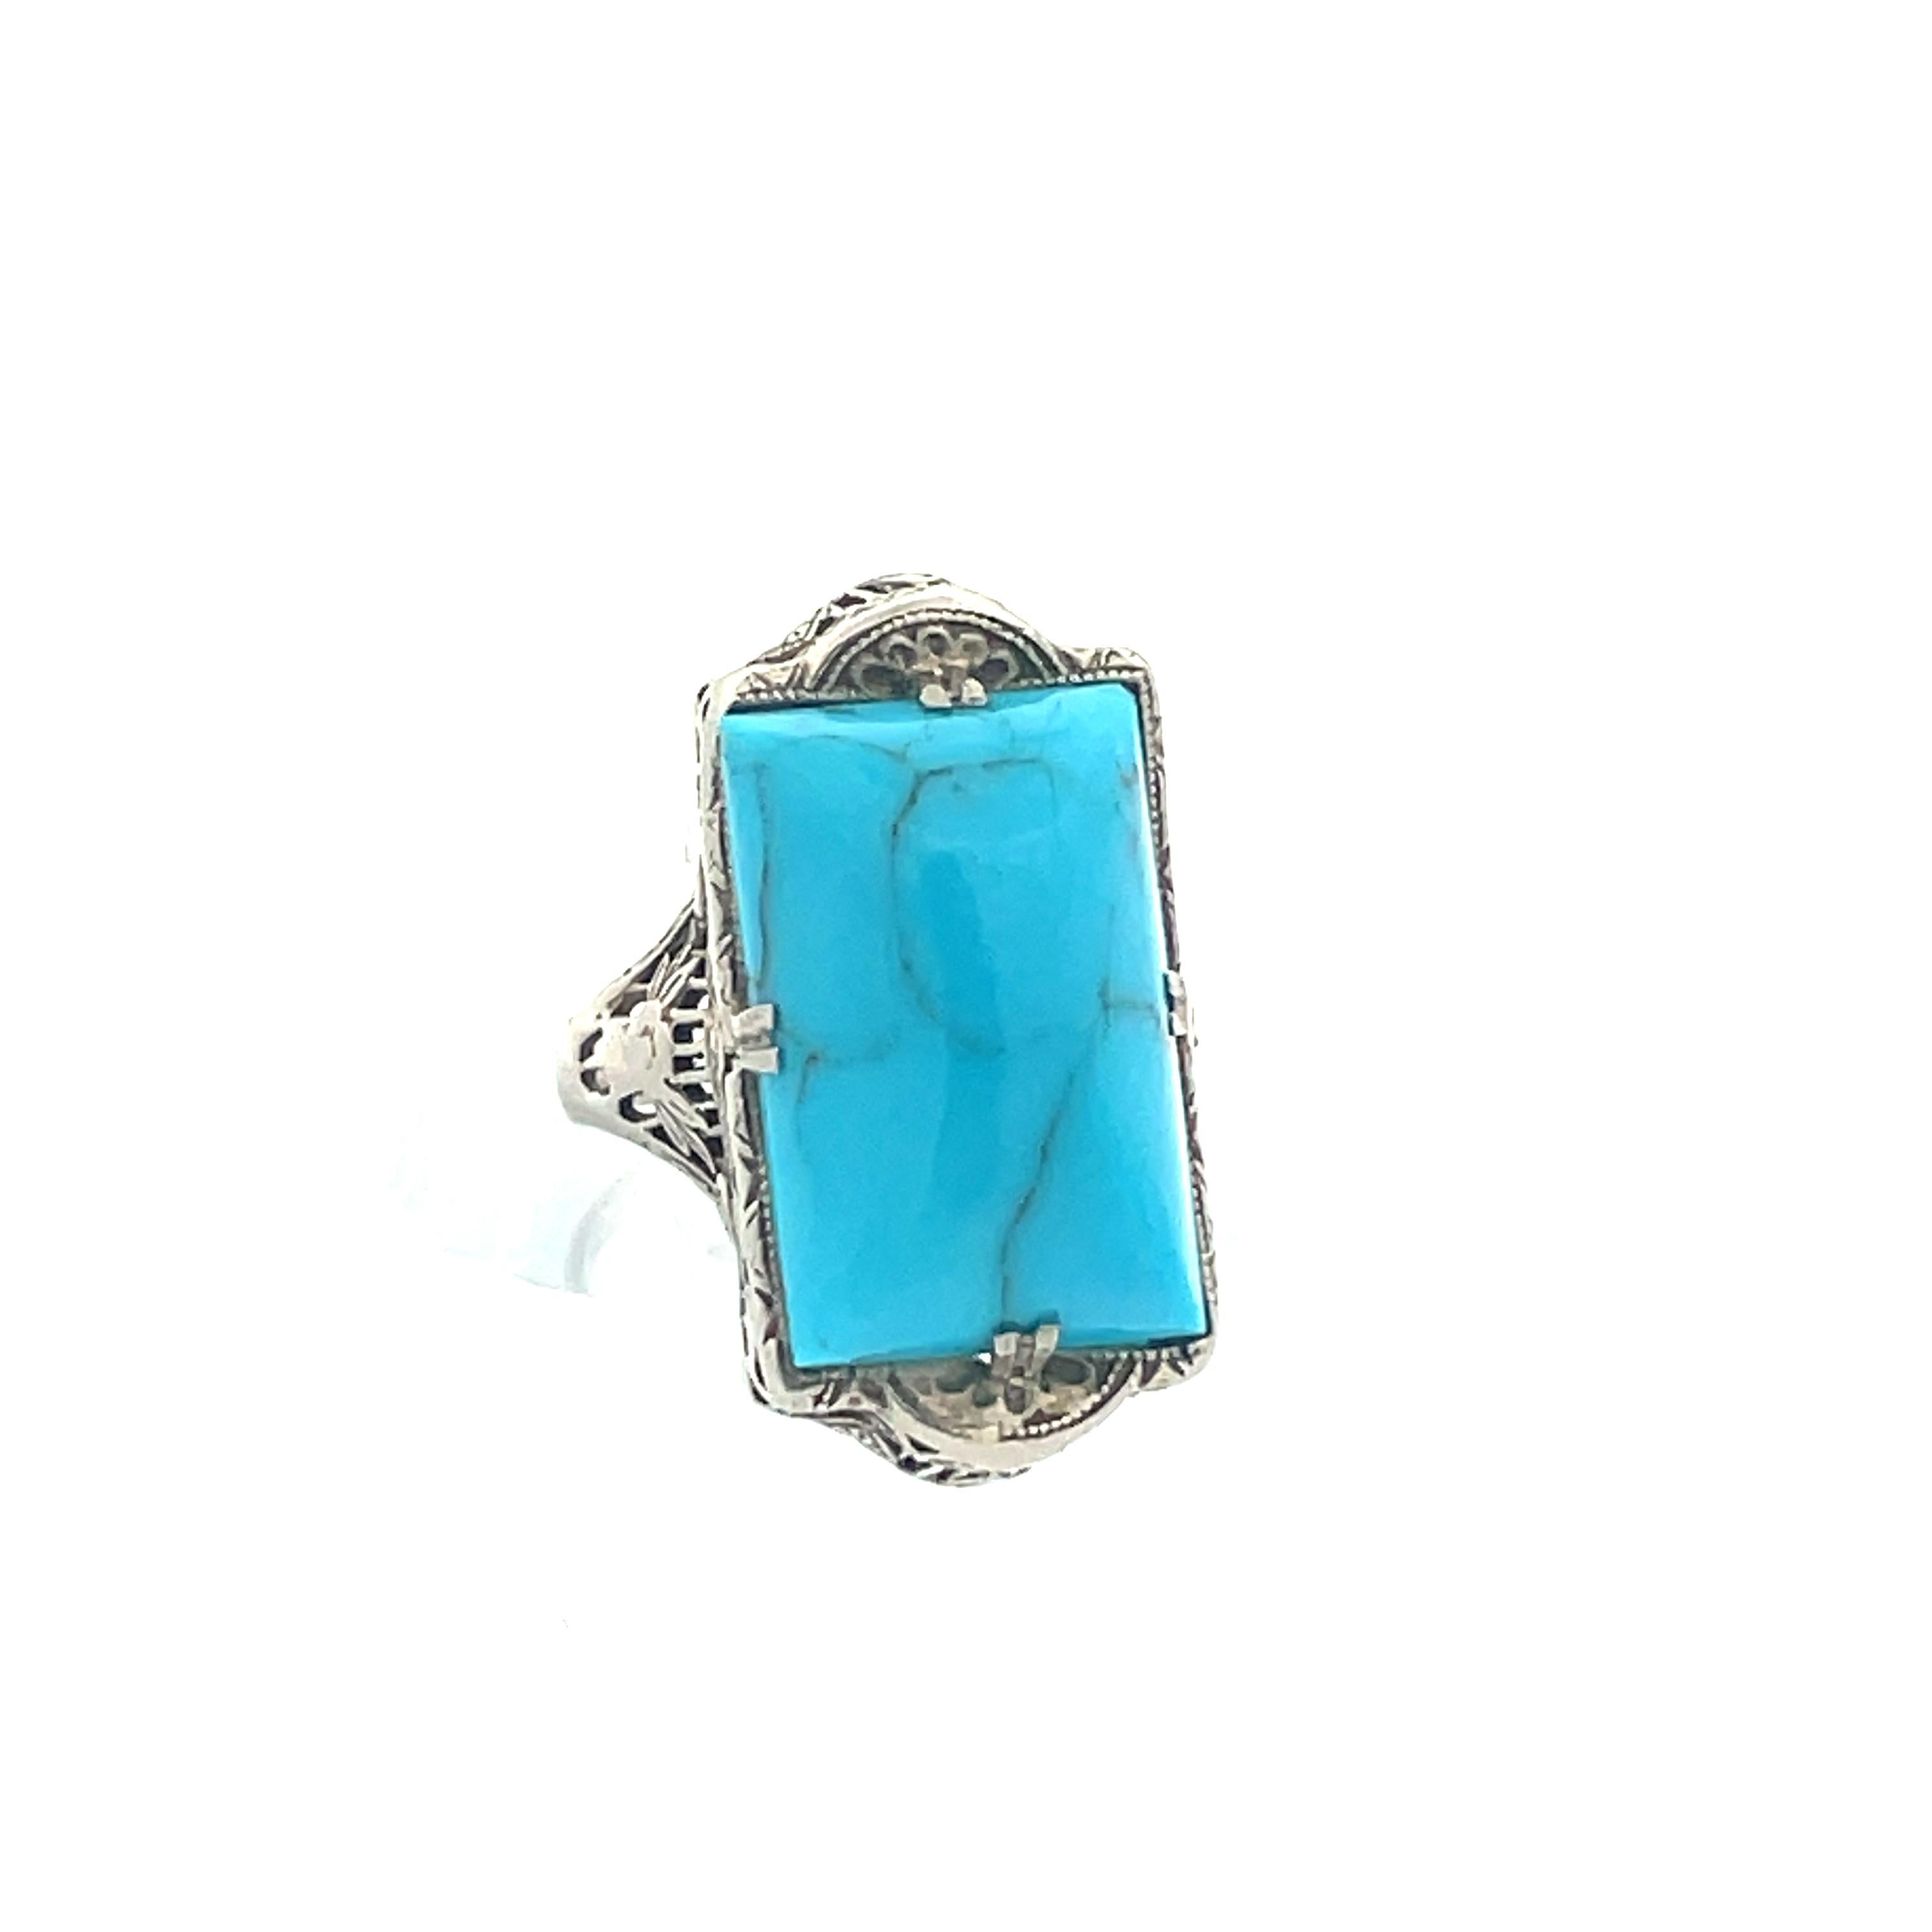 This beautiful 1920s14k white gold filigree ring features a cabochon cut turquoise stone, reminiscent of clear Caribbean blue waters with natural beauty and striking colors. Turquoise pairs beautifully with various precious metals as well as other